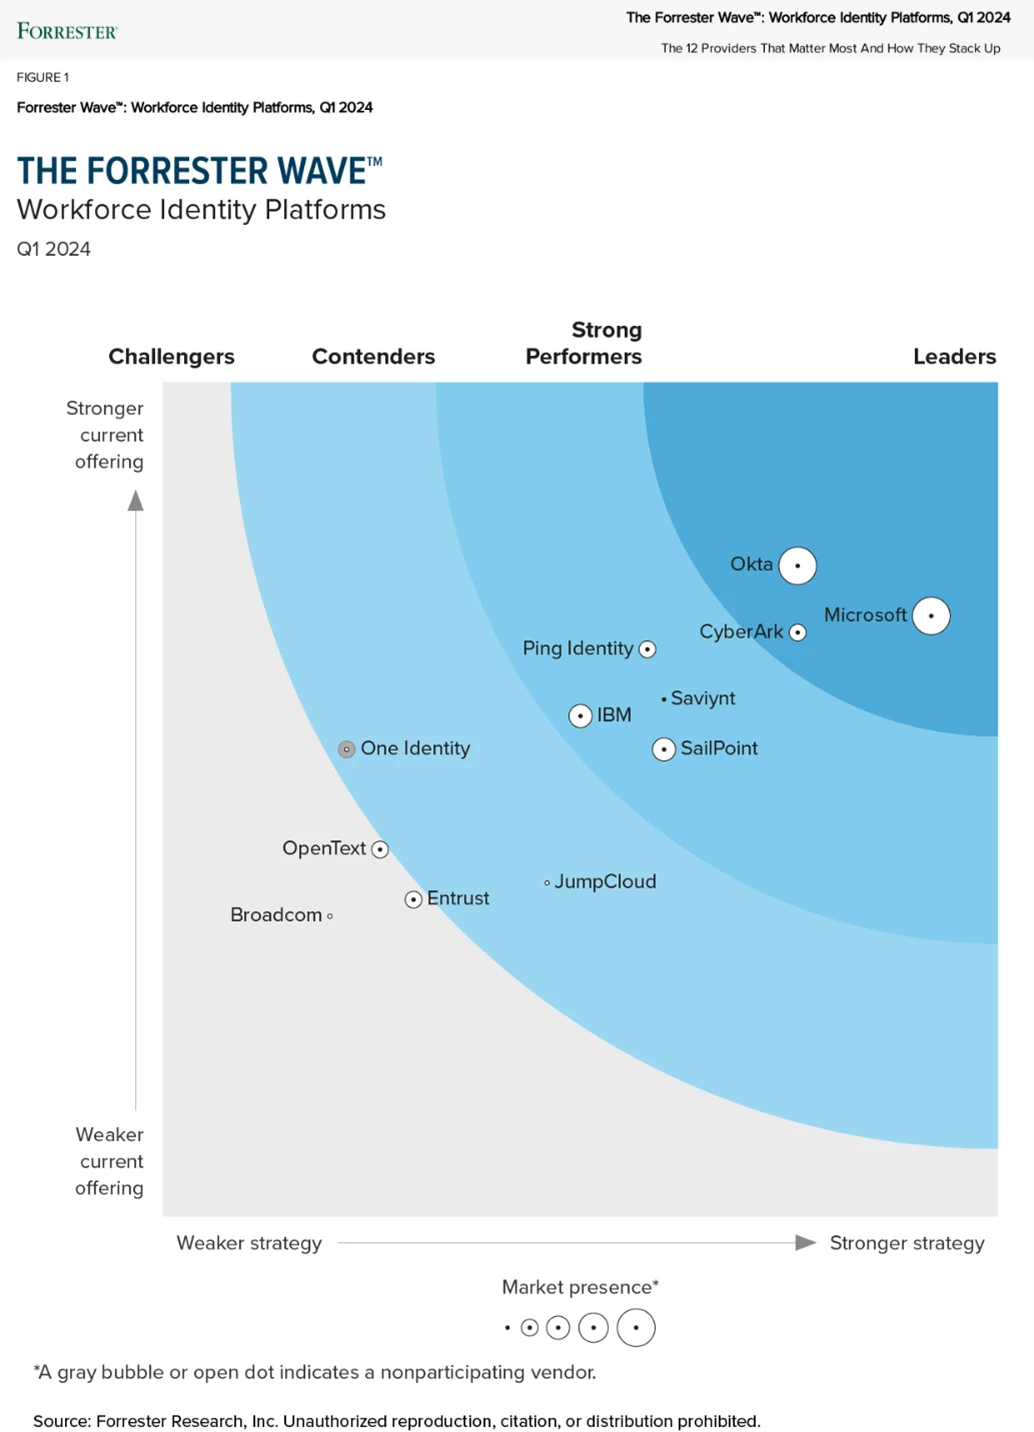 Forrester Wave™  Workforce Identity Platforms Landscape, Q4 2023 graphic with Microsoft positioned as a Leader.